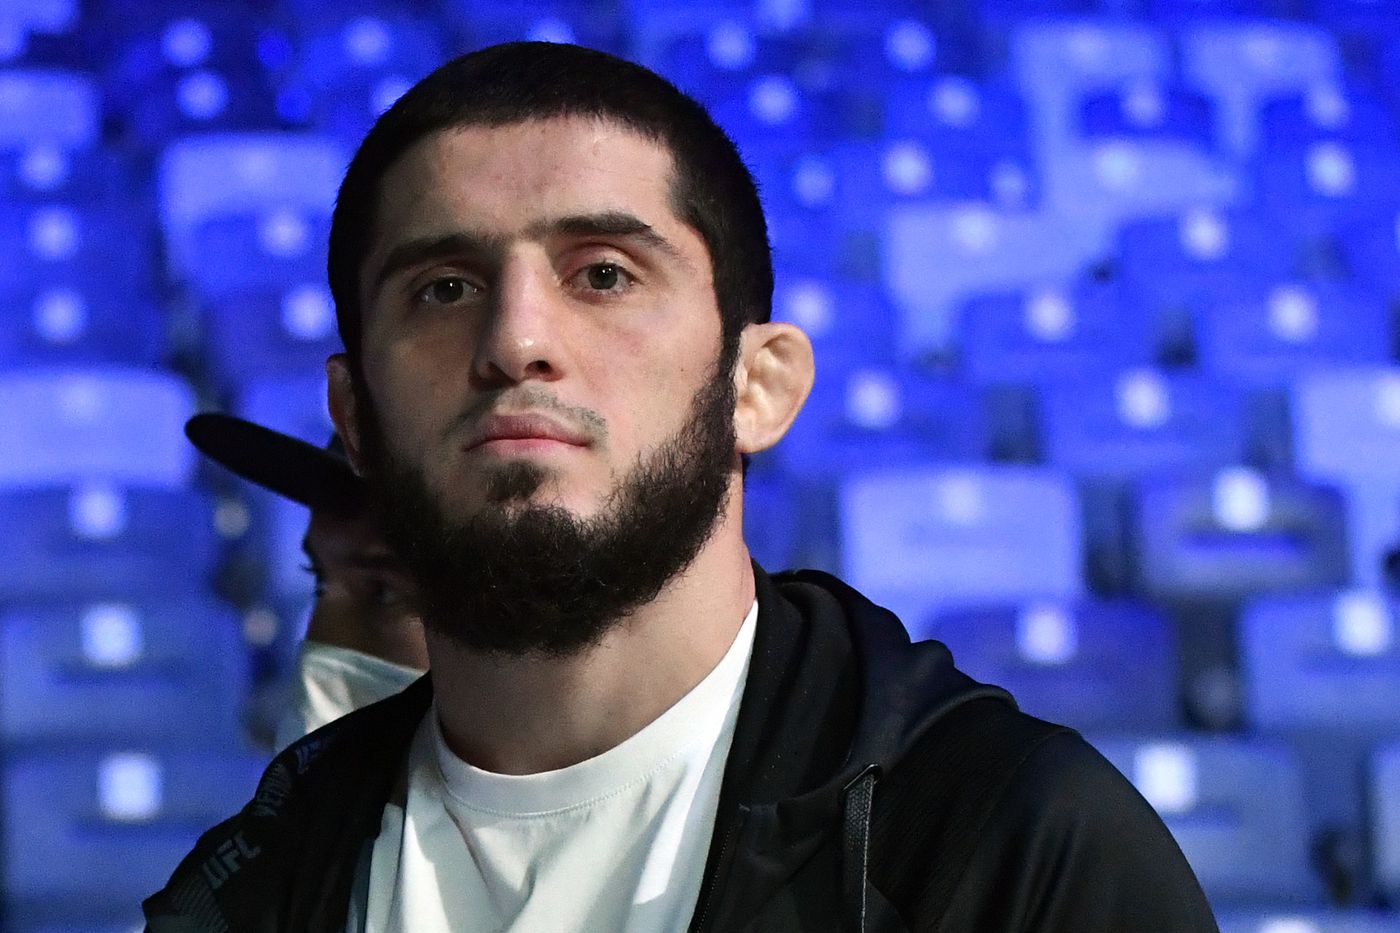 Islam Makhachev tells Alexander Volkanovski to stay in the featherweight division 